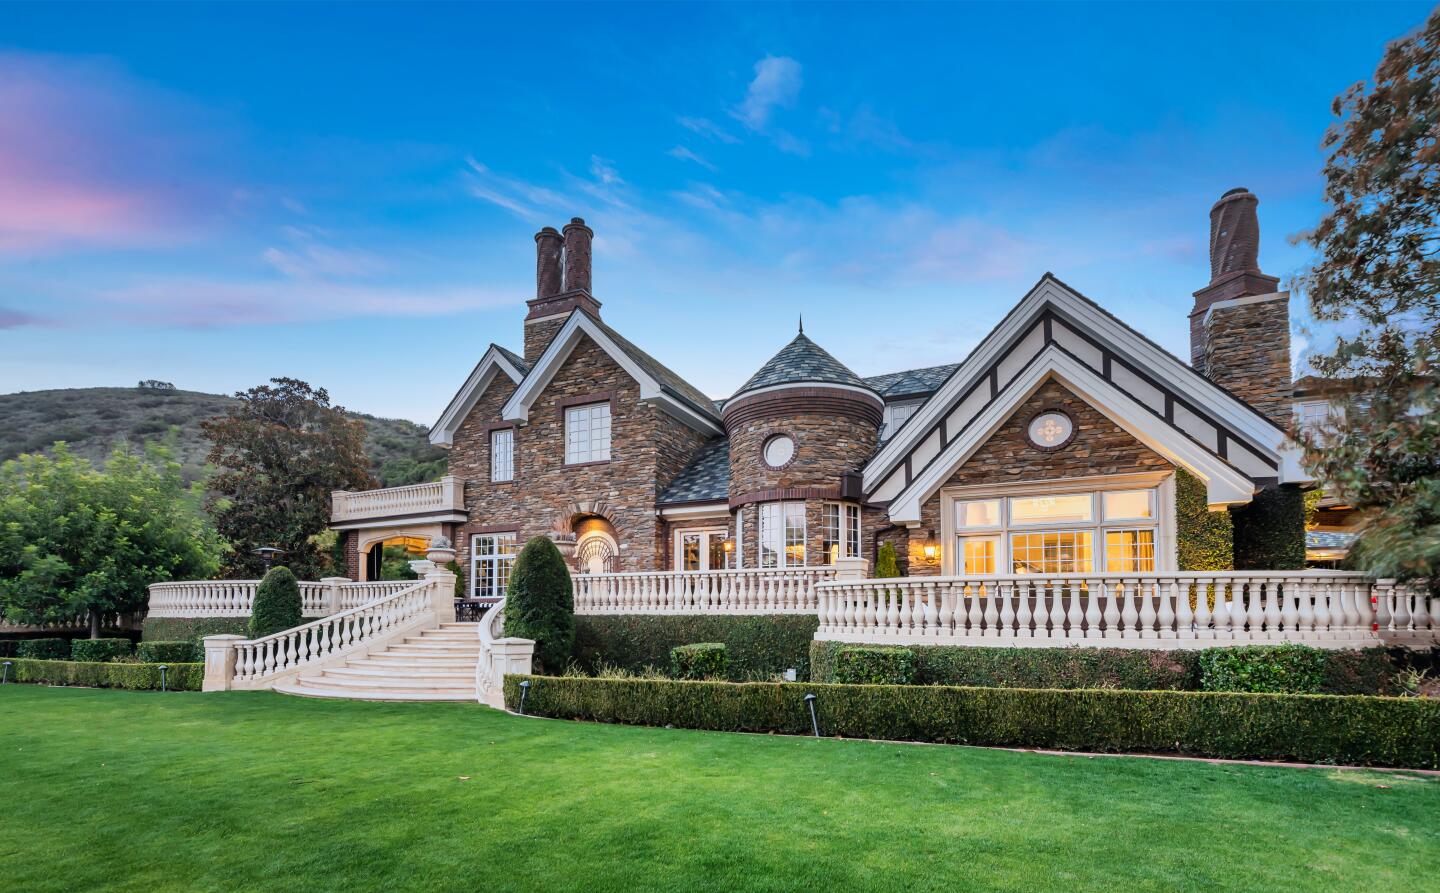 The compound centers on a 10,000-square-foot English-style manor, which the couple remodeled during their stay.